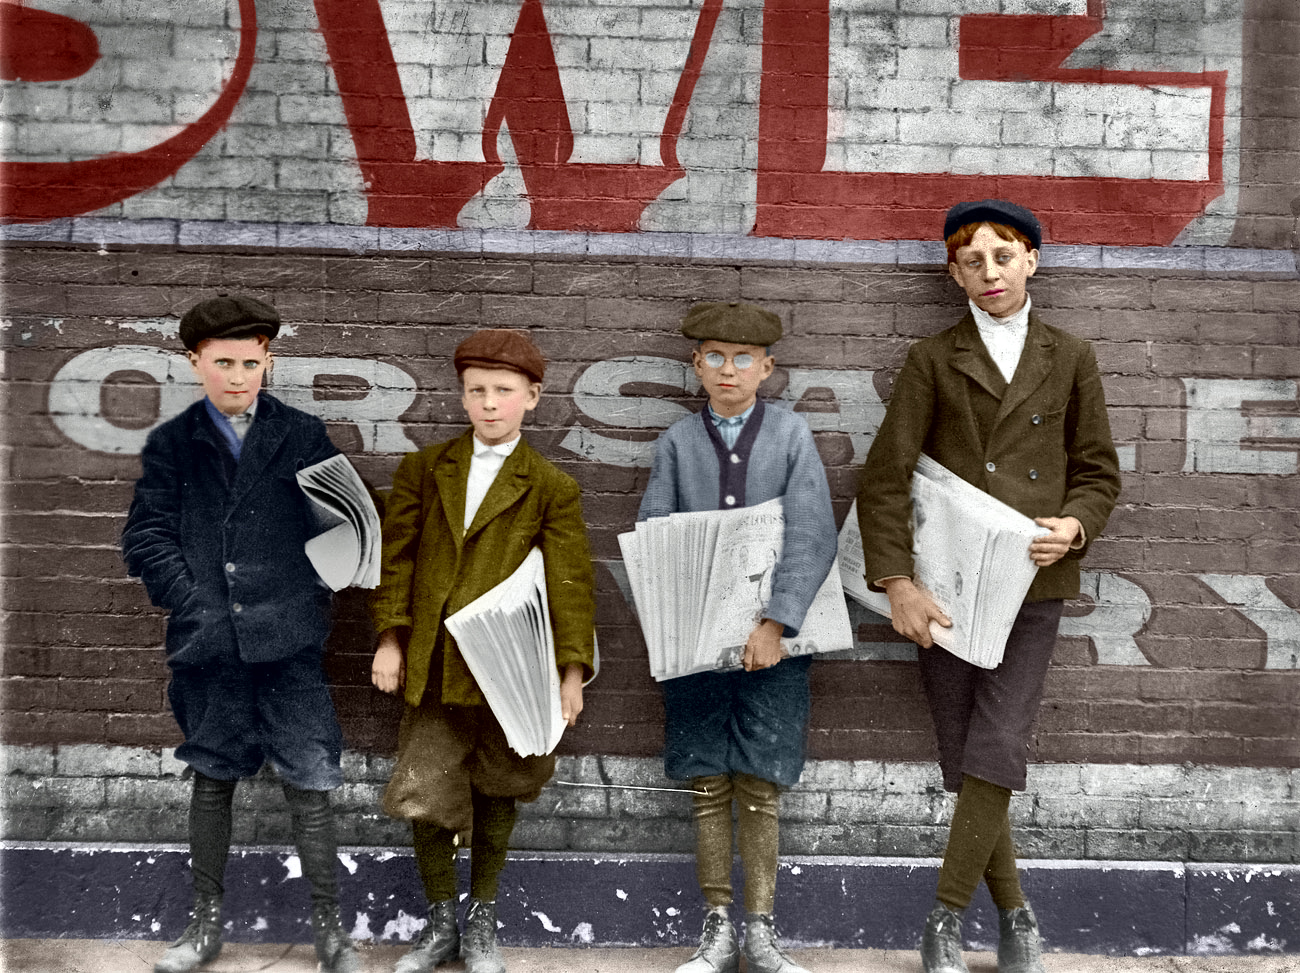 A colorized version of this 1910 photo by Lewis Hine. View full size.